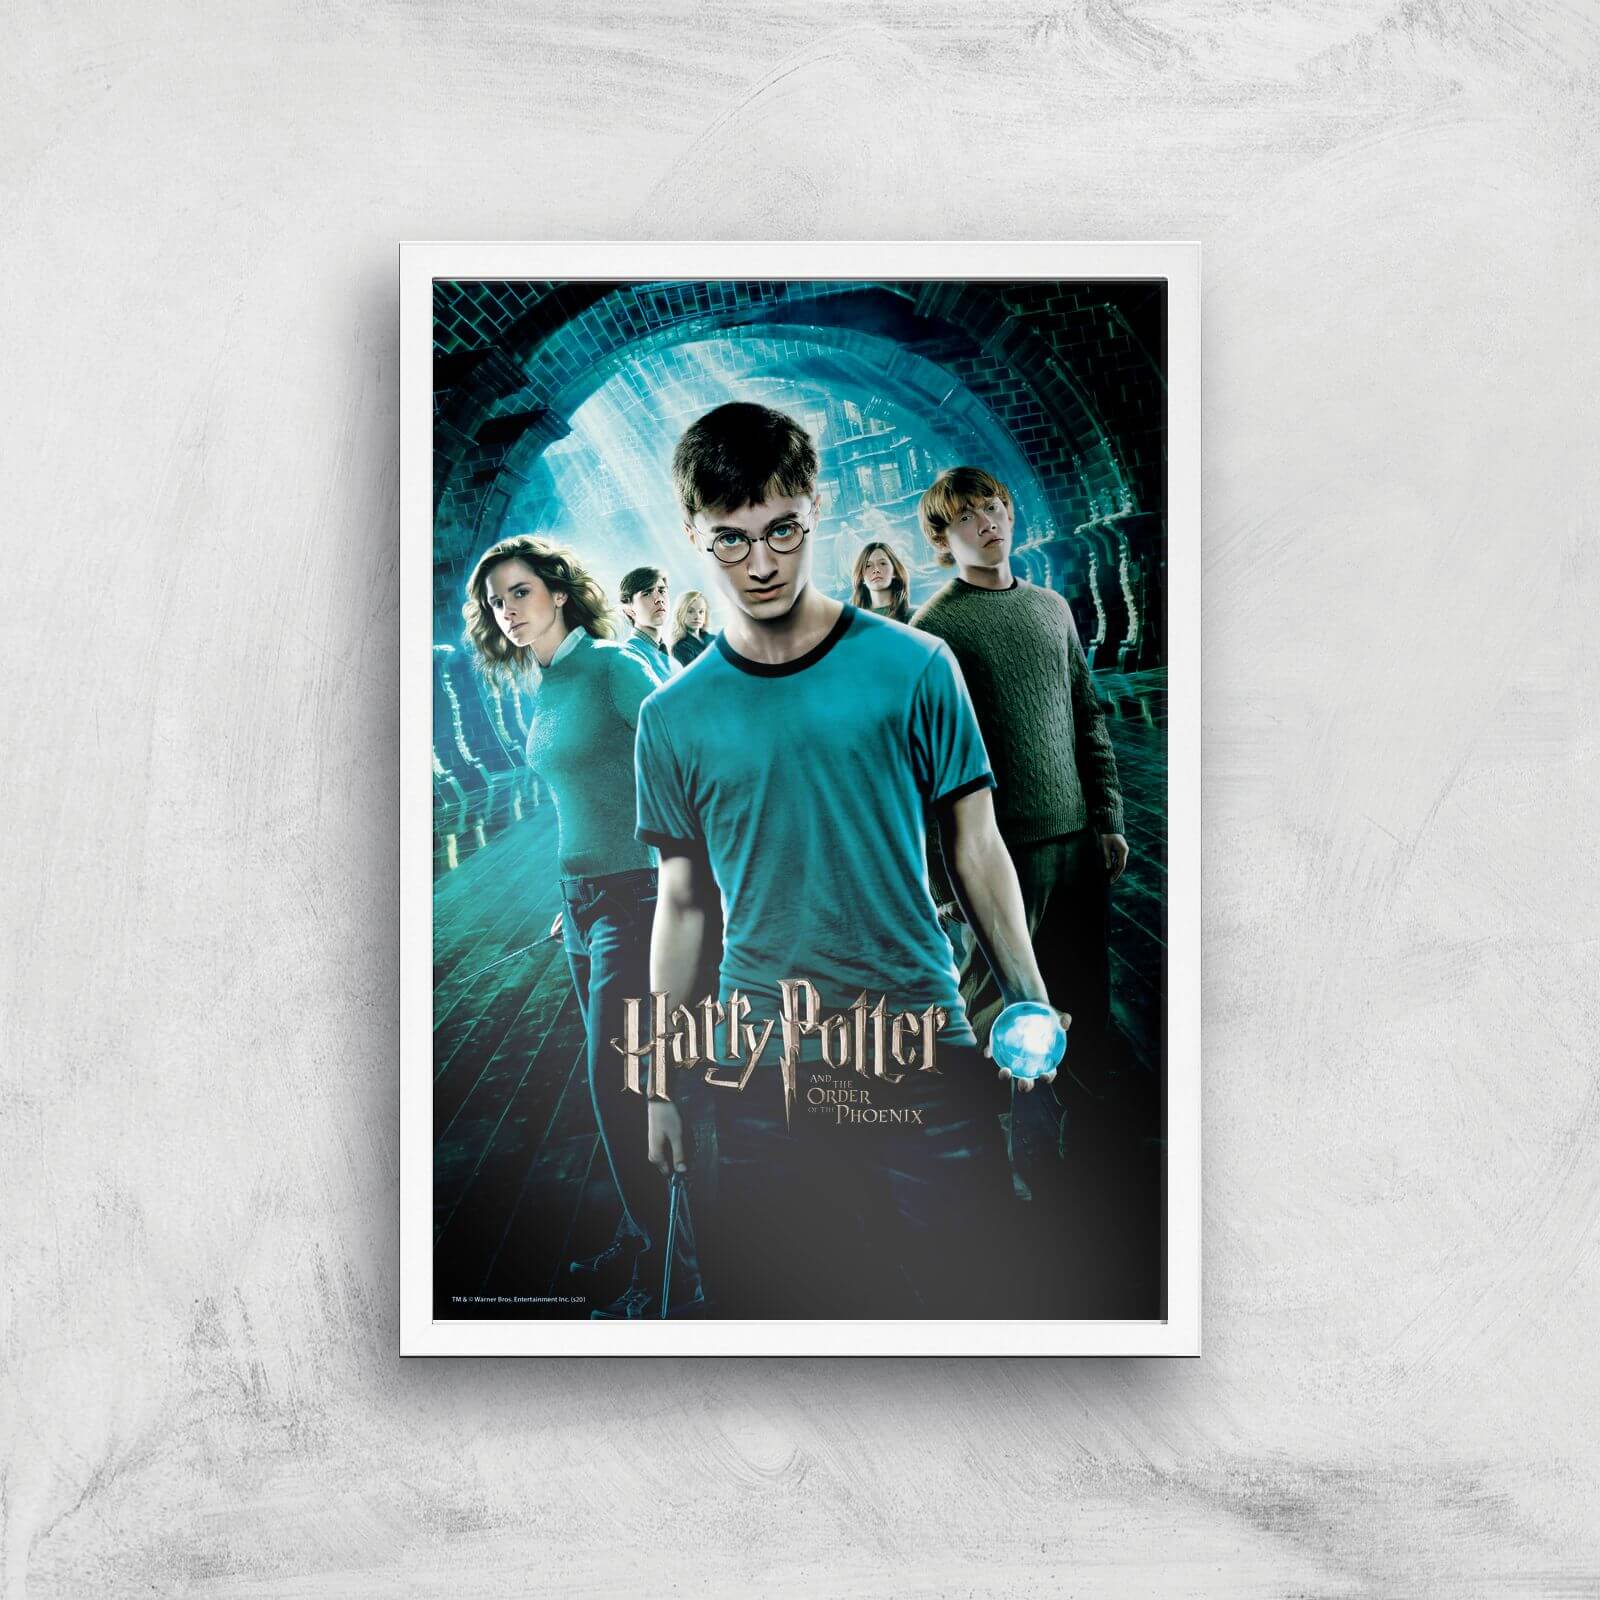 Harry Potter and the Order Of The Phoenix Giclee Art Print - A2 - White Frame